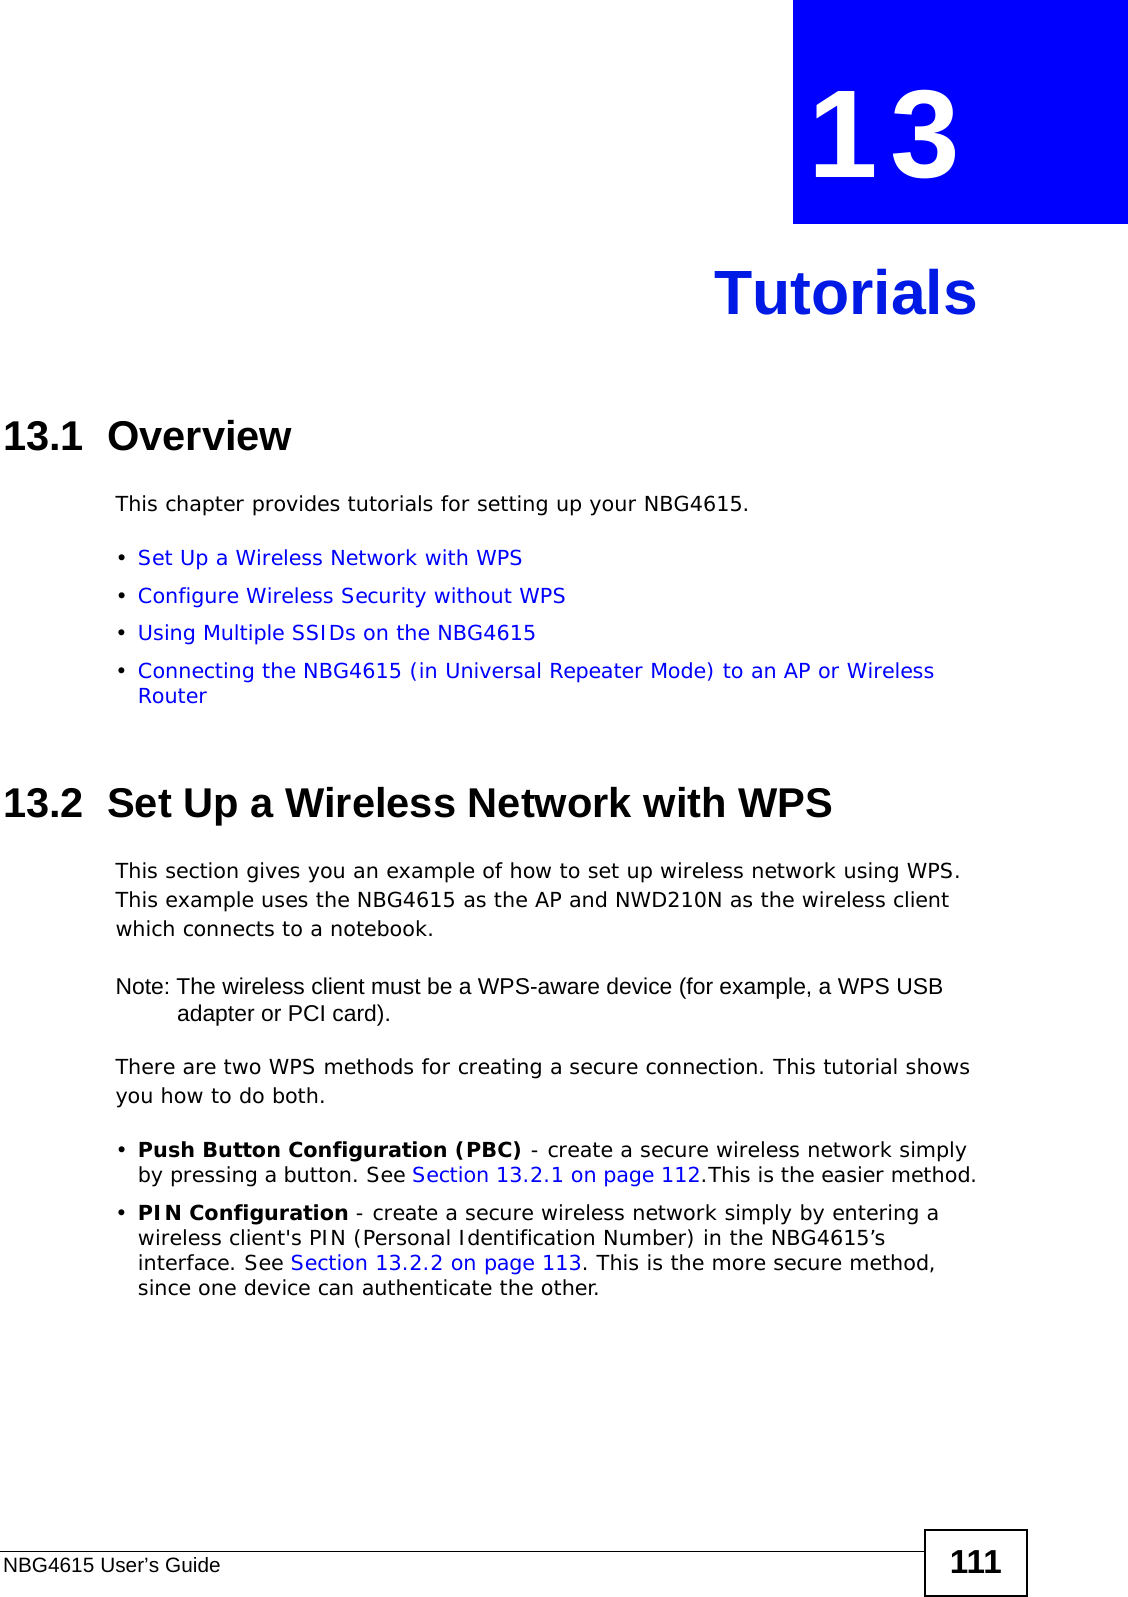 NBG4615 User’s Guide 111CHAPTER  13 Tutorials13.1  OverviewThis chapter provides tutorials for setting up your NBG4615.•Set Up a Wireless Network with WPS•Configure Wireless Security without WPS•Using Multiple SSIDs on the NBG4615•Connecting the NBG4615 (in Universal Repeater Mode) to an AP or Wireless Router13.2  Set Up a Wireless Network with WPSThis section gives you an example of how to set up wireless network using WPS. This example uses the NBG4615 as the AP and NWD210N as the wireless client which connects to a notebook. Note: The wireless client must be a WPS-aware device (for example, a WPS USB adapter or PCI card).There are two WPS methods for creating a secure connection. This tutorial shows you how to do both.•Push Button Configuration (PBC) - create a secure wireless network simply by pressing a button. See Section 13.2.1 on page 112.This is the easier method.•PIN Configuration - create a secure wireless network simply by entering a wireless client&apos;s PIN (Personal Identification Number) in the NBG4615’s interface. See Section 13.2.2 on page 113. This is the more secure method, since one device can authenticate the other.